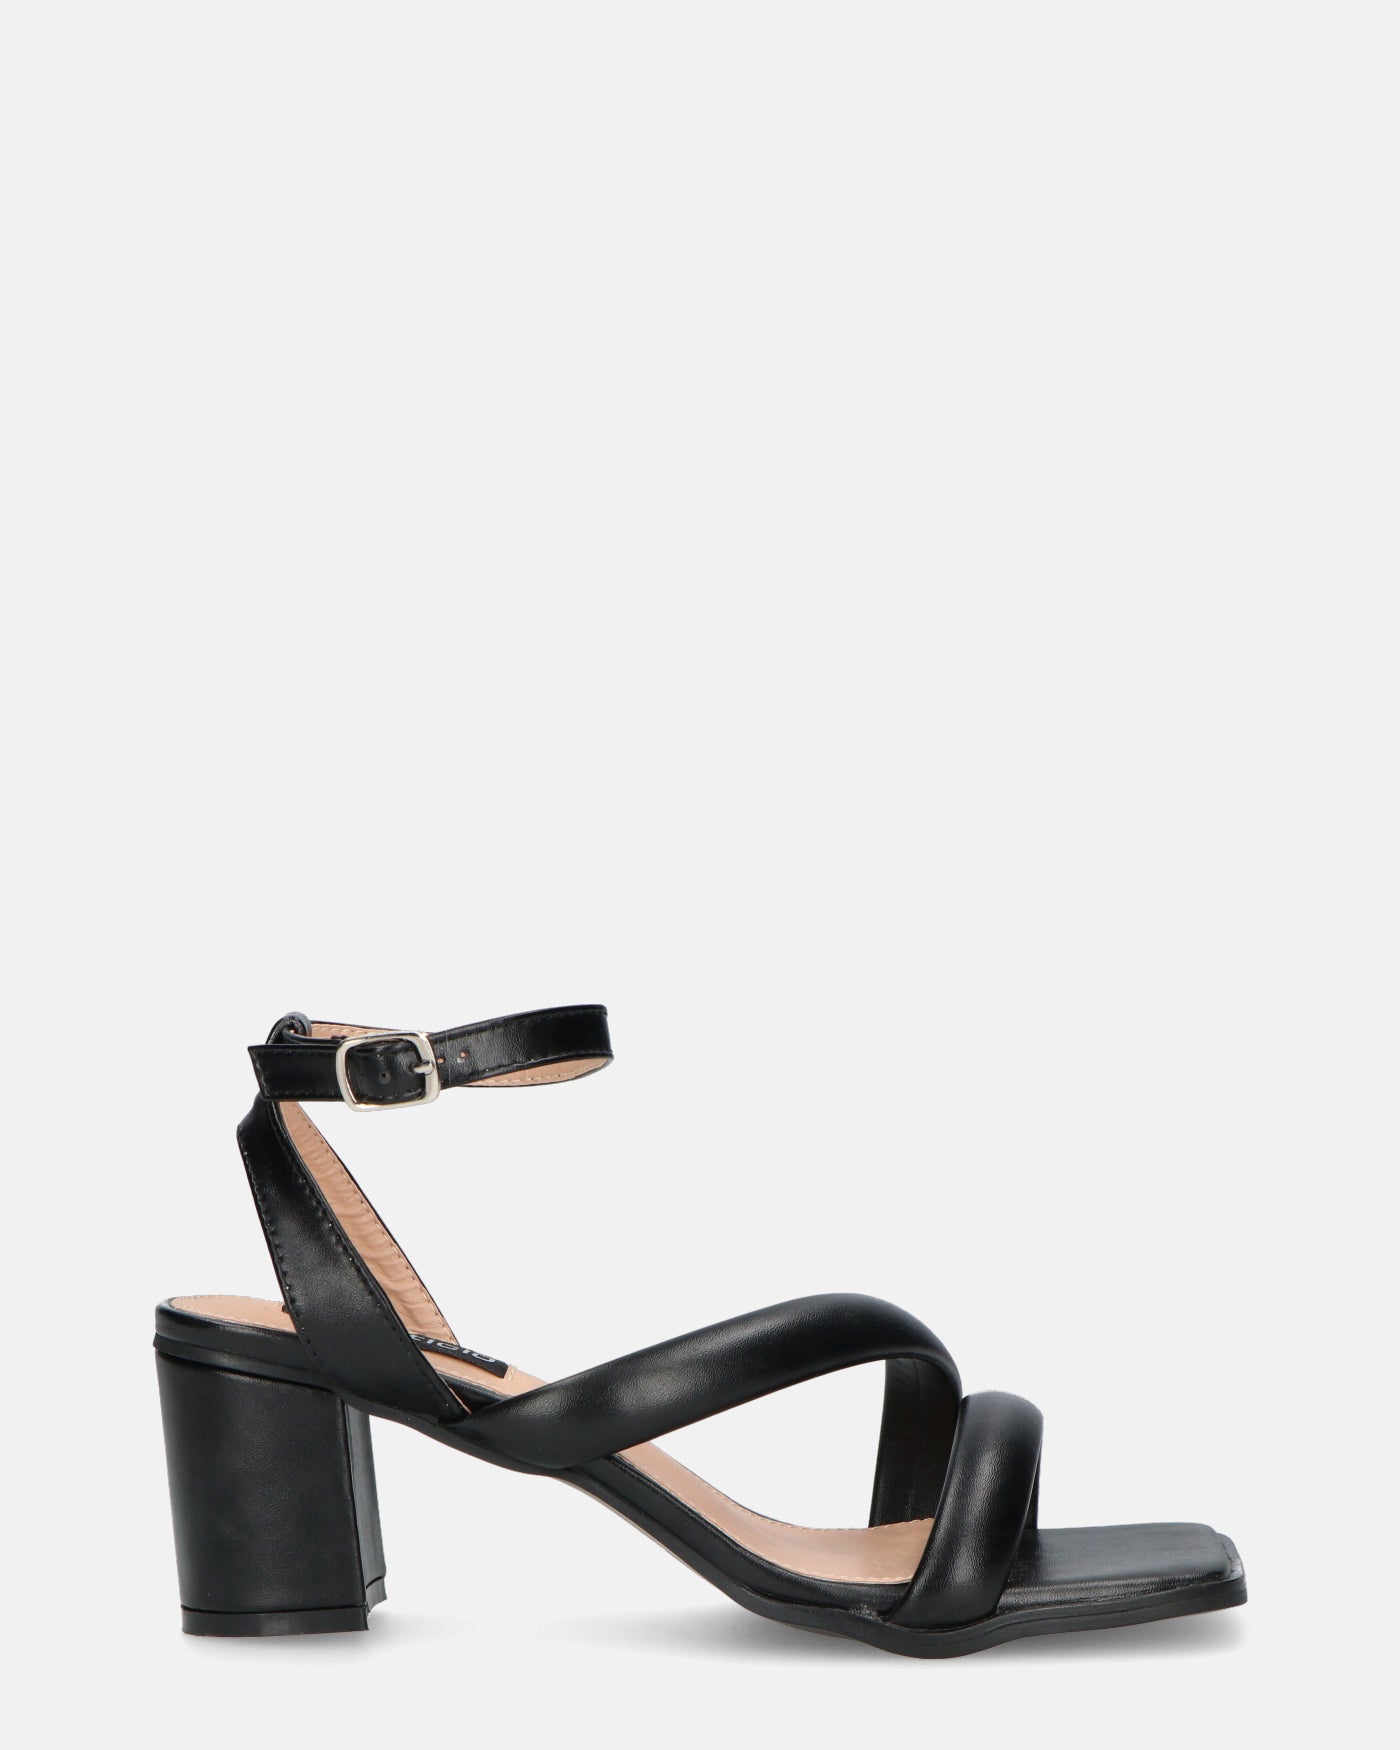 HIROE - black eco-leather heeled sandals with strap